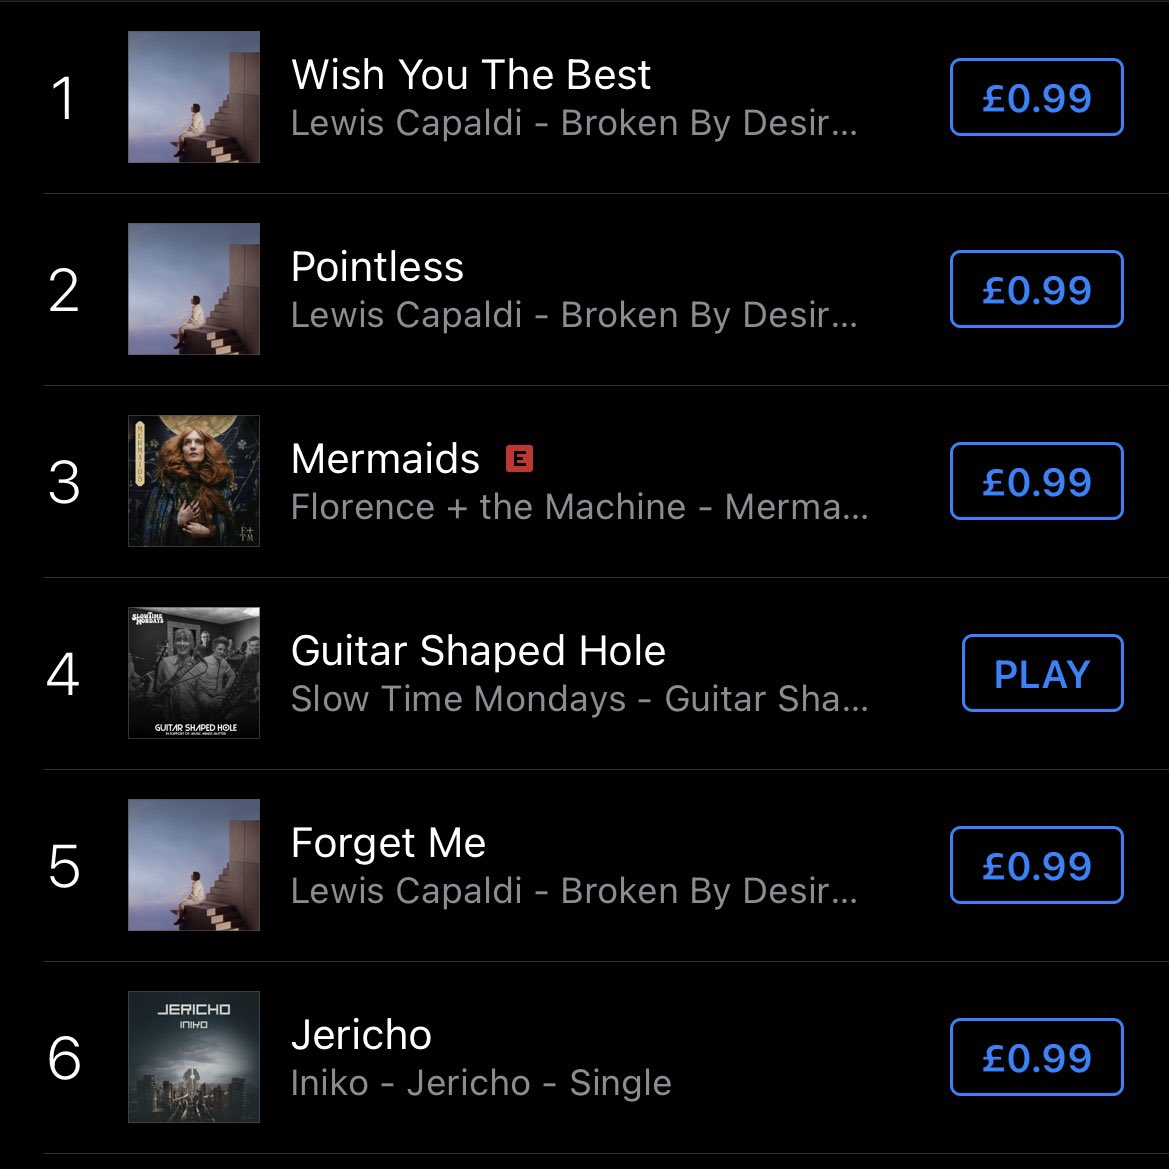 On this day last year, we released our very special single ‘Guitar Shaped Hole’, written in memory of our friend Mike Dobie. We peaked at #30 in the iTunes singles chart and #4 in the alternative genre chart! 🤯 A day we’ll never forget. Keep the faith, peace and love 🤍